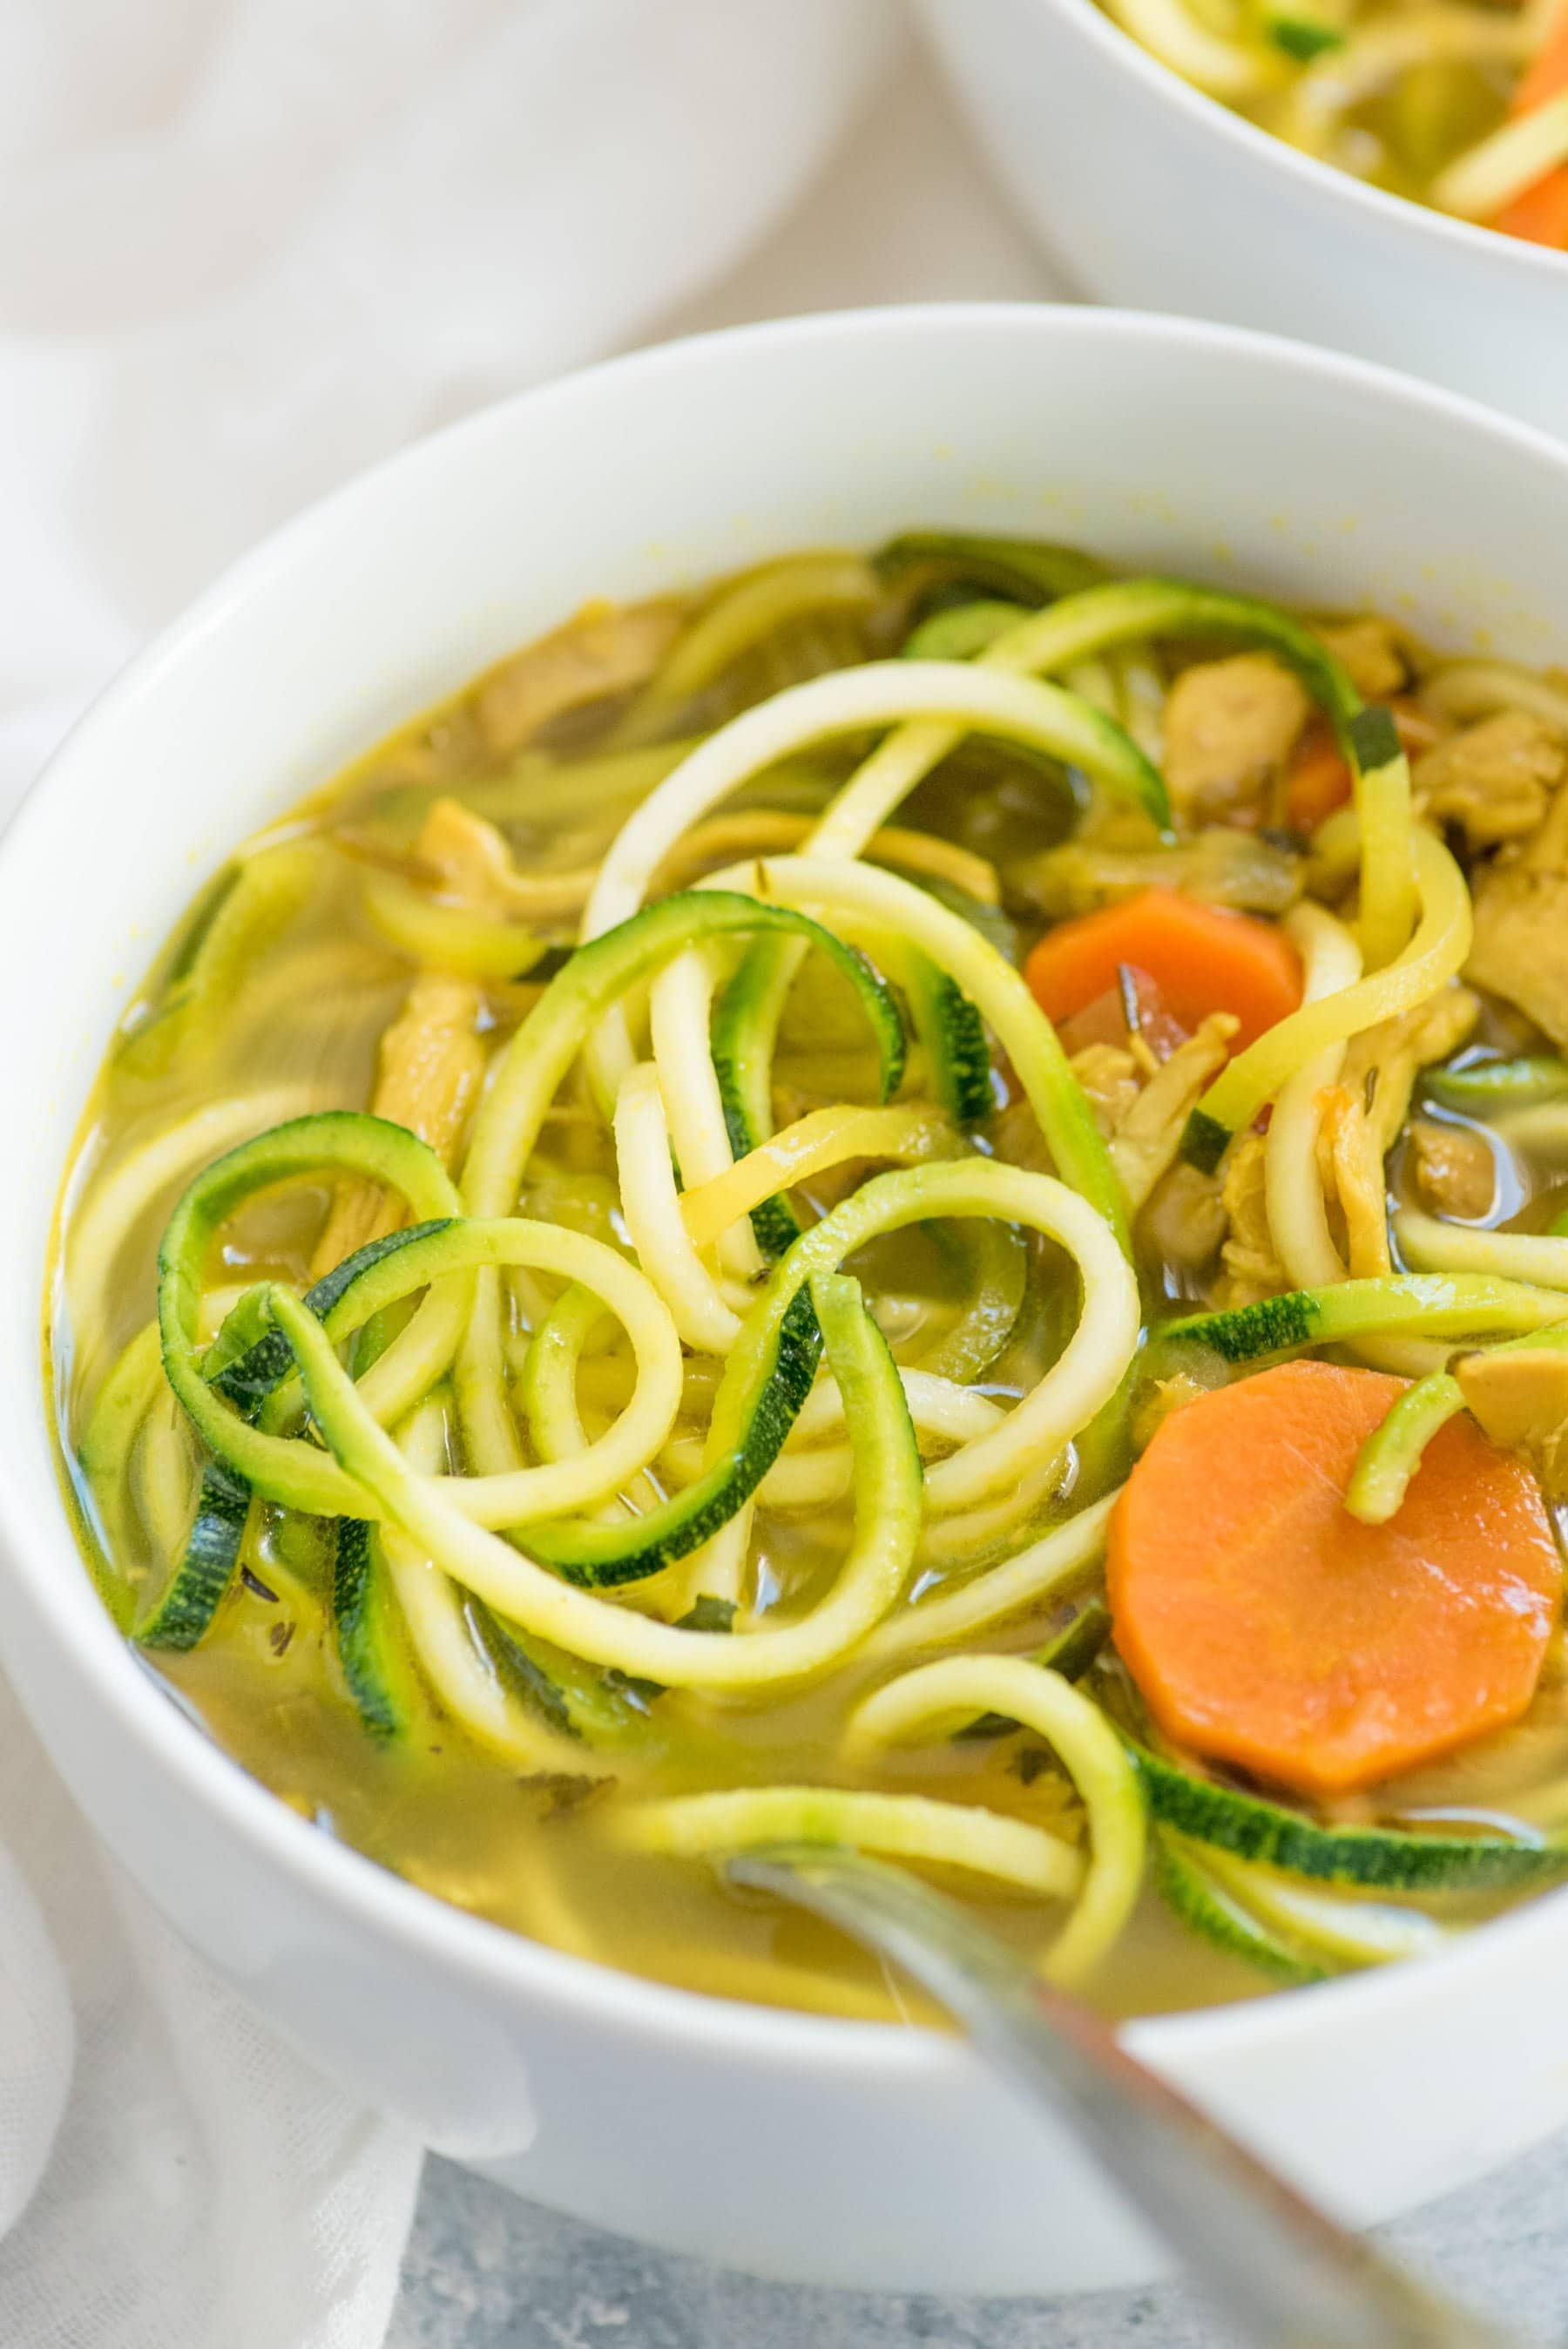 Tight view of Chicken Zoodle Soup in a while bowl with a spoon in the soup. Zucchini noodles and carrot slices are floating in a rich broth.